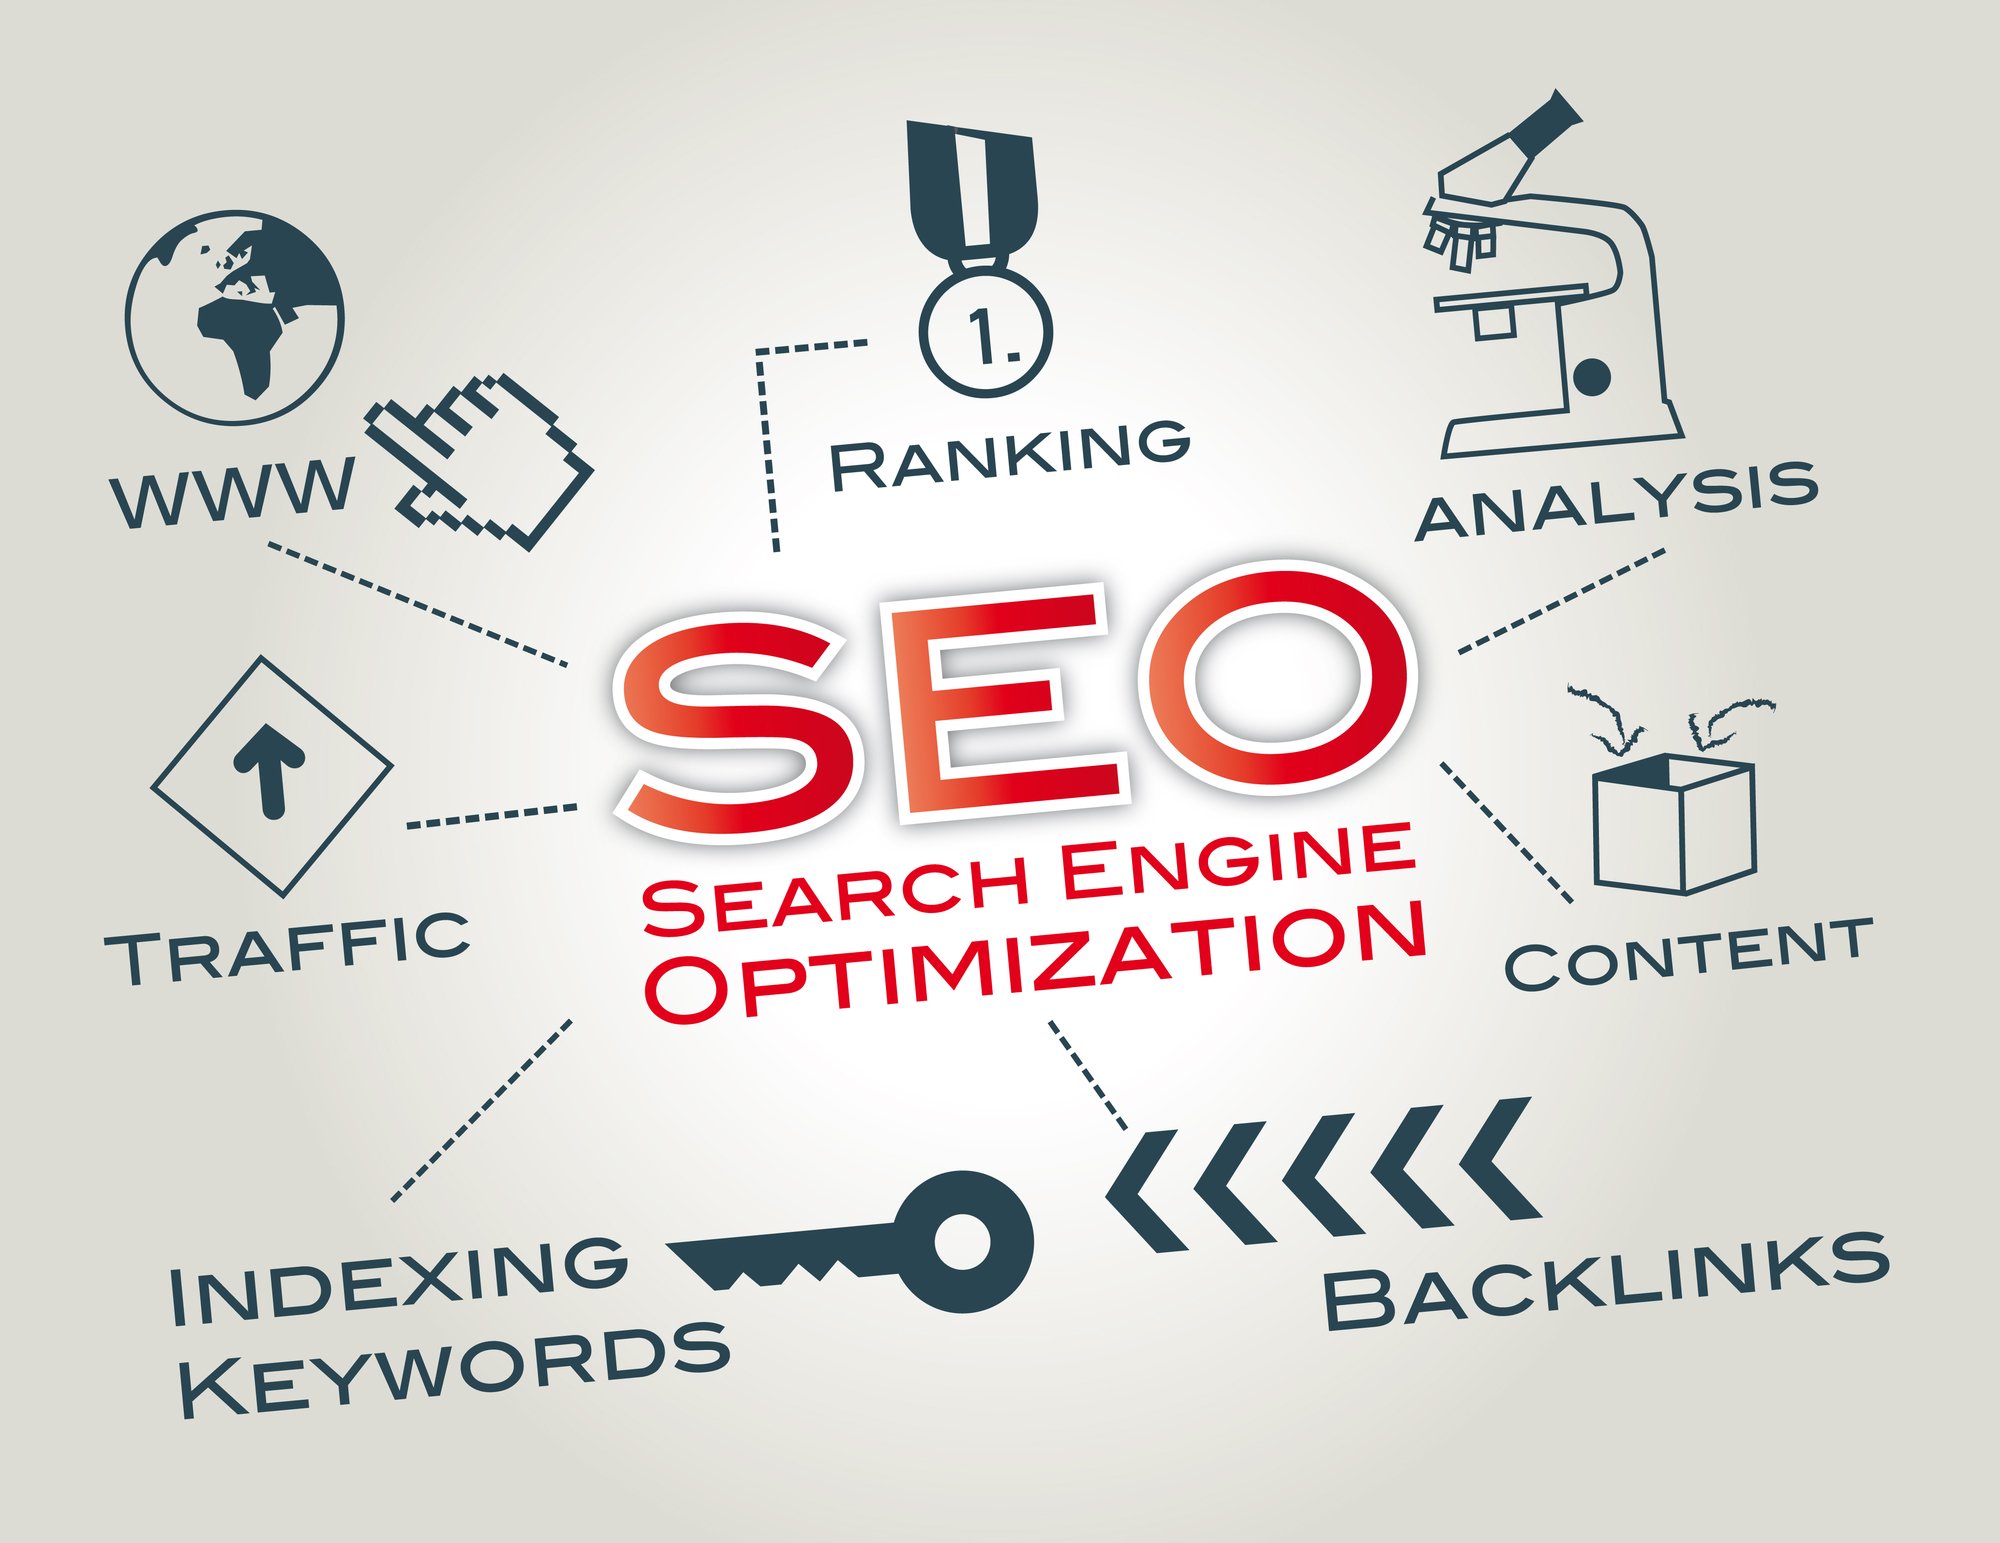 SEO, search engine optimization, important for lead generation.